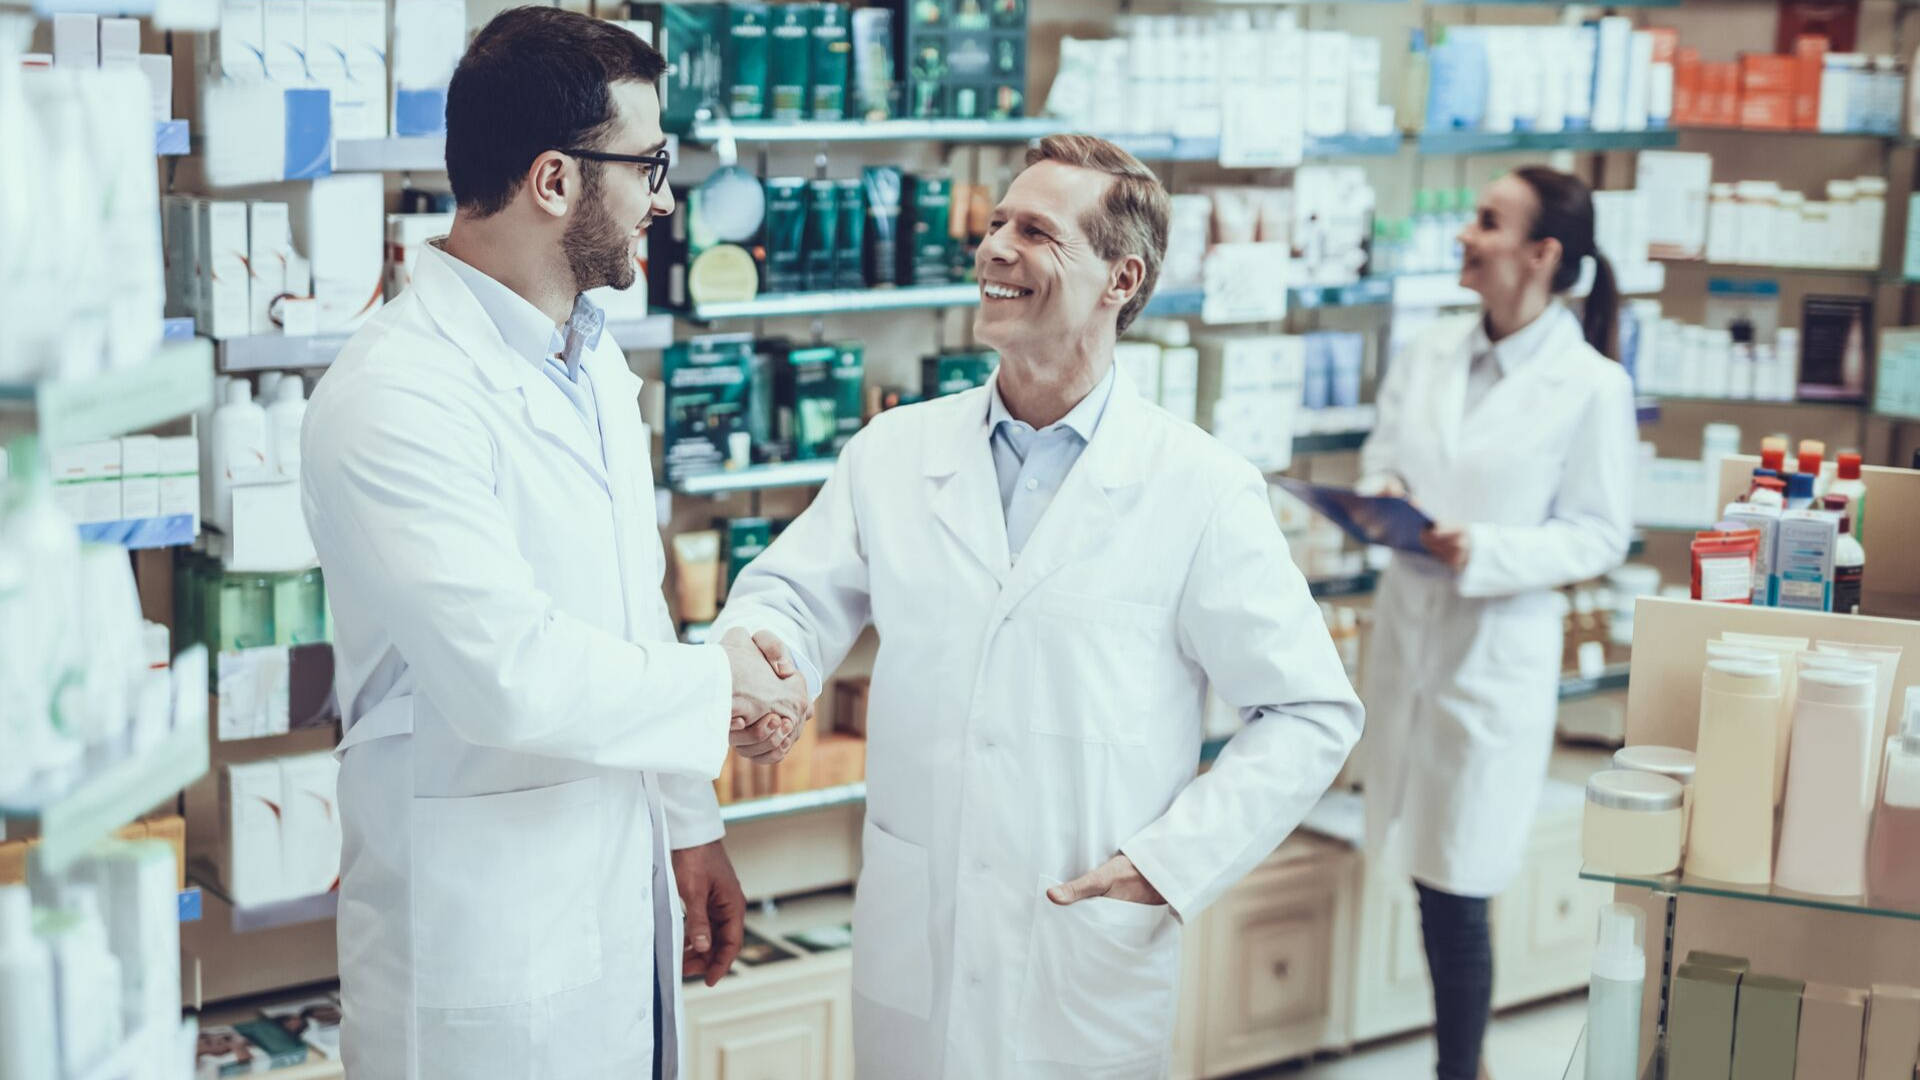 Pharmacists Forming A Professional Connection Through Handshake